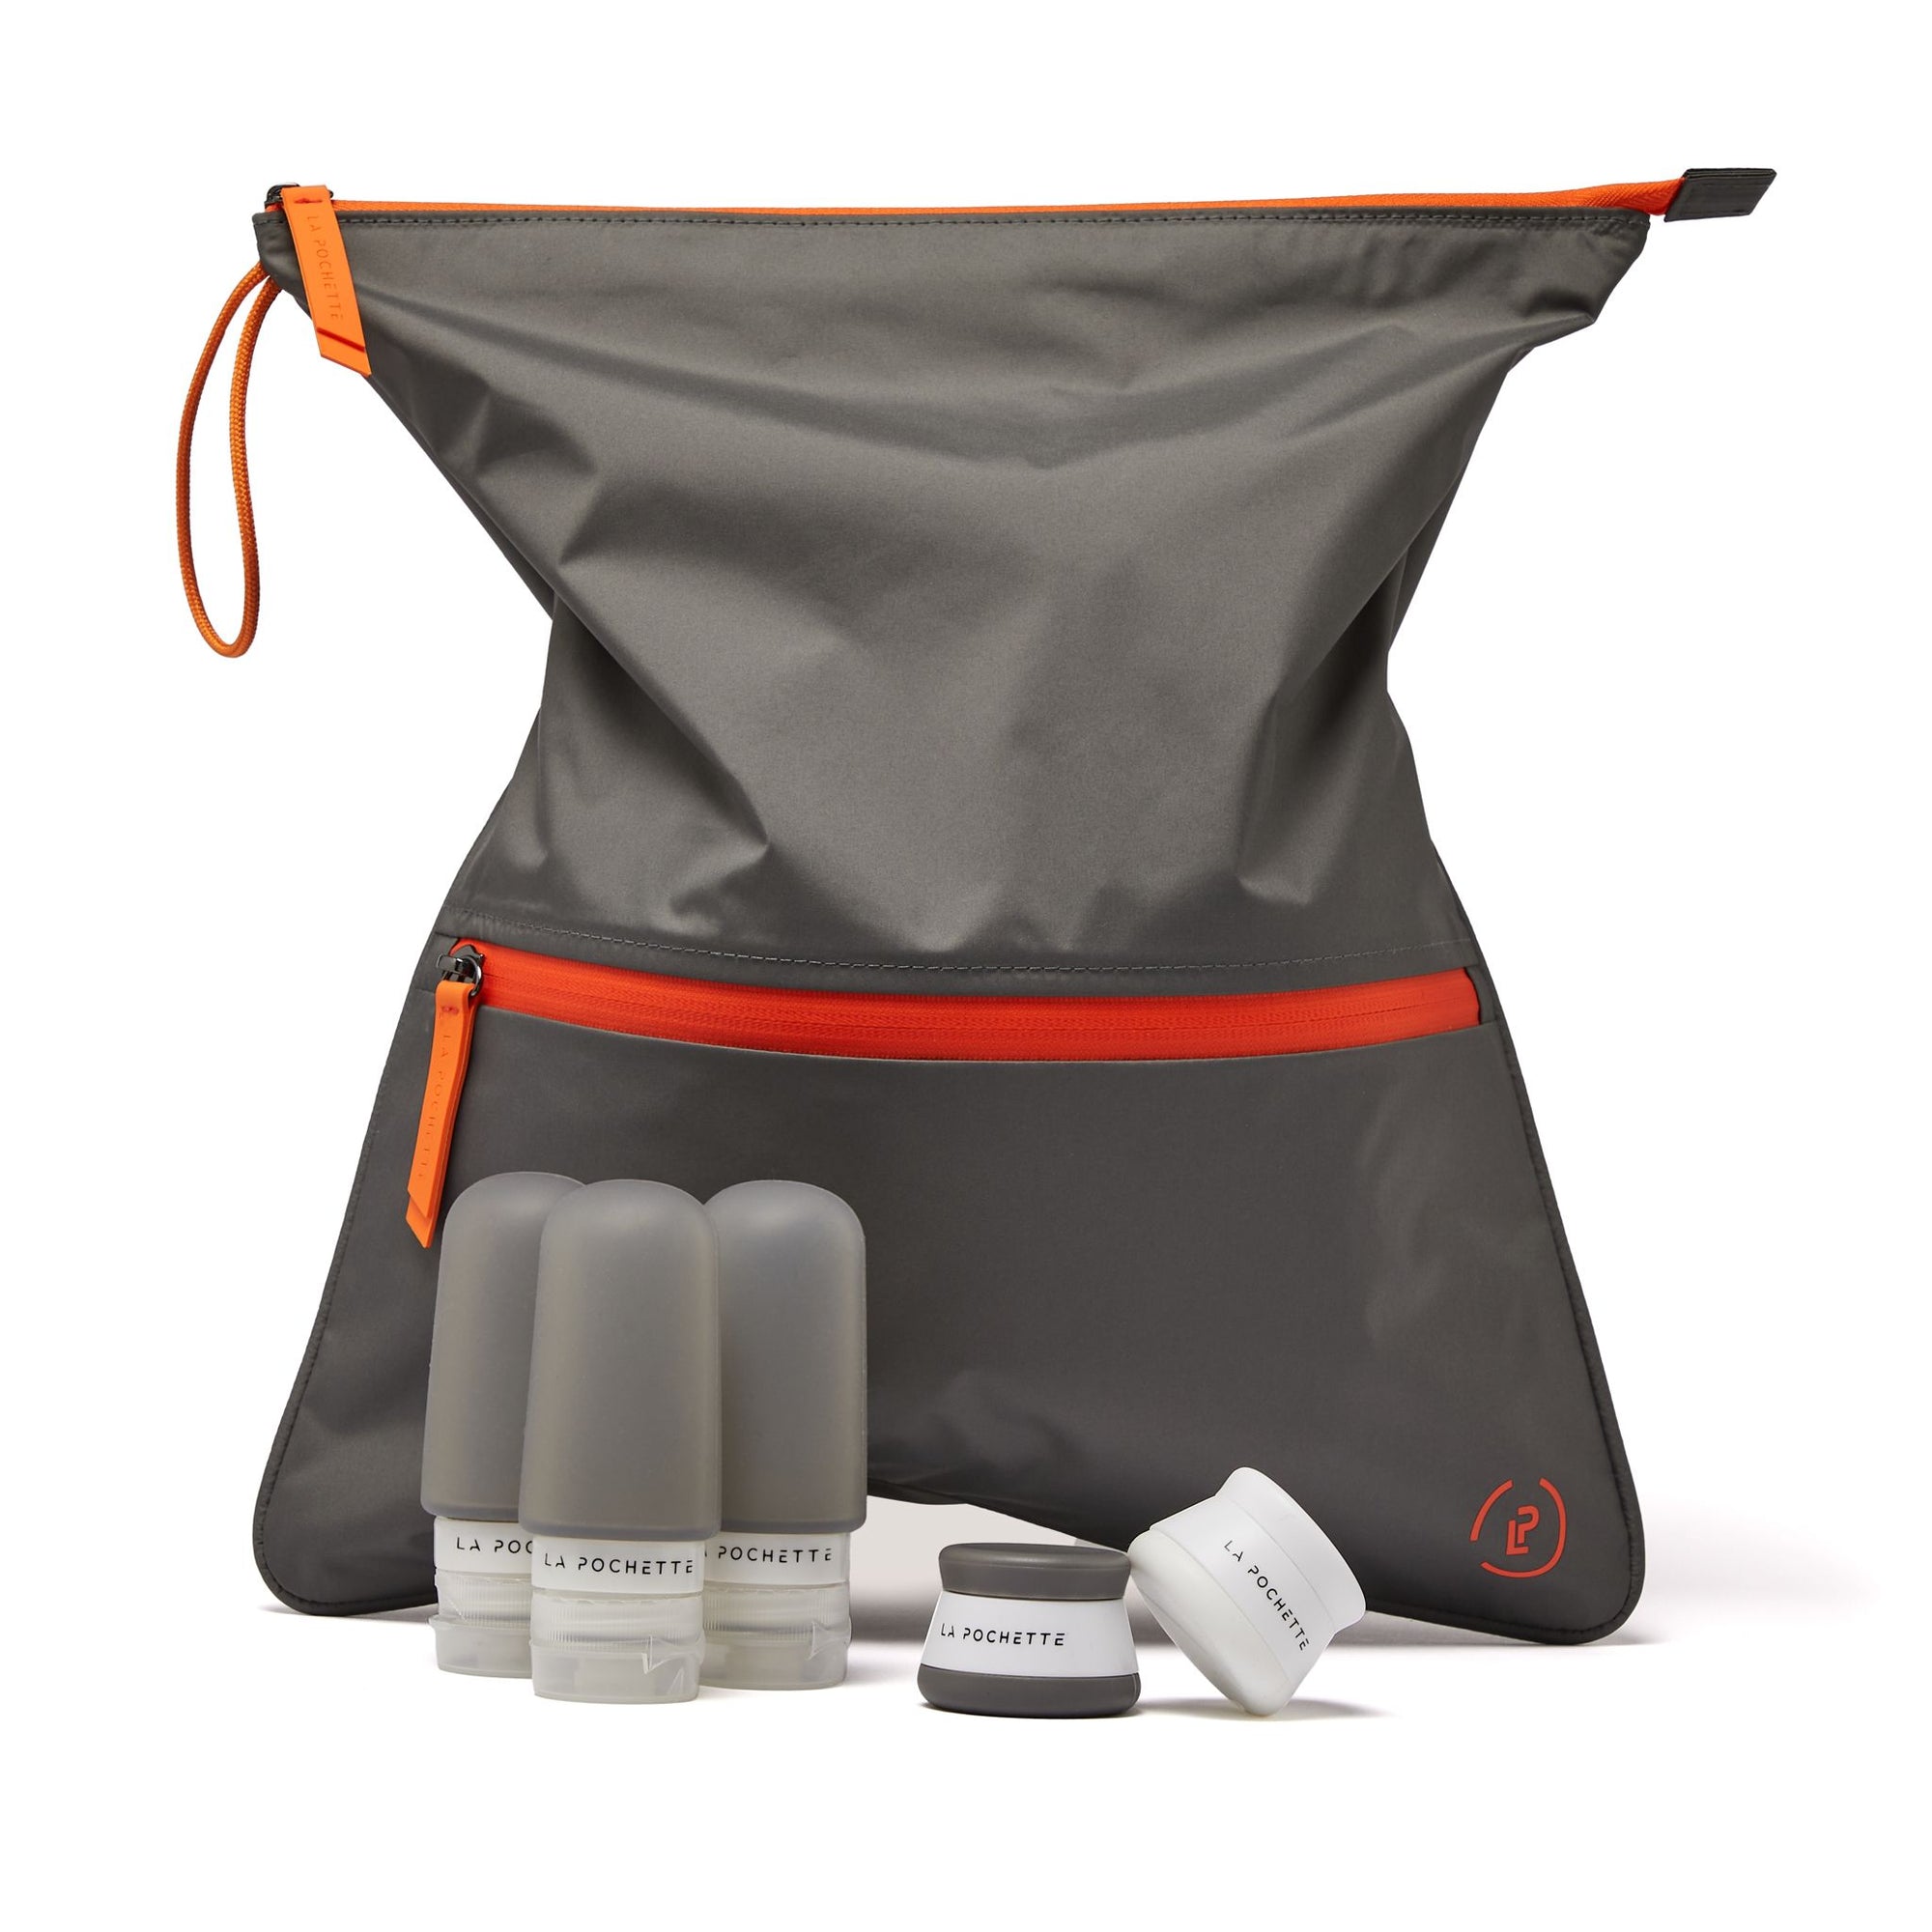 Pewter Flame Sweat Bag Bundle with Charcoal travel bottles and travel pots